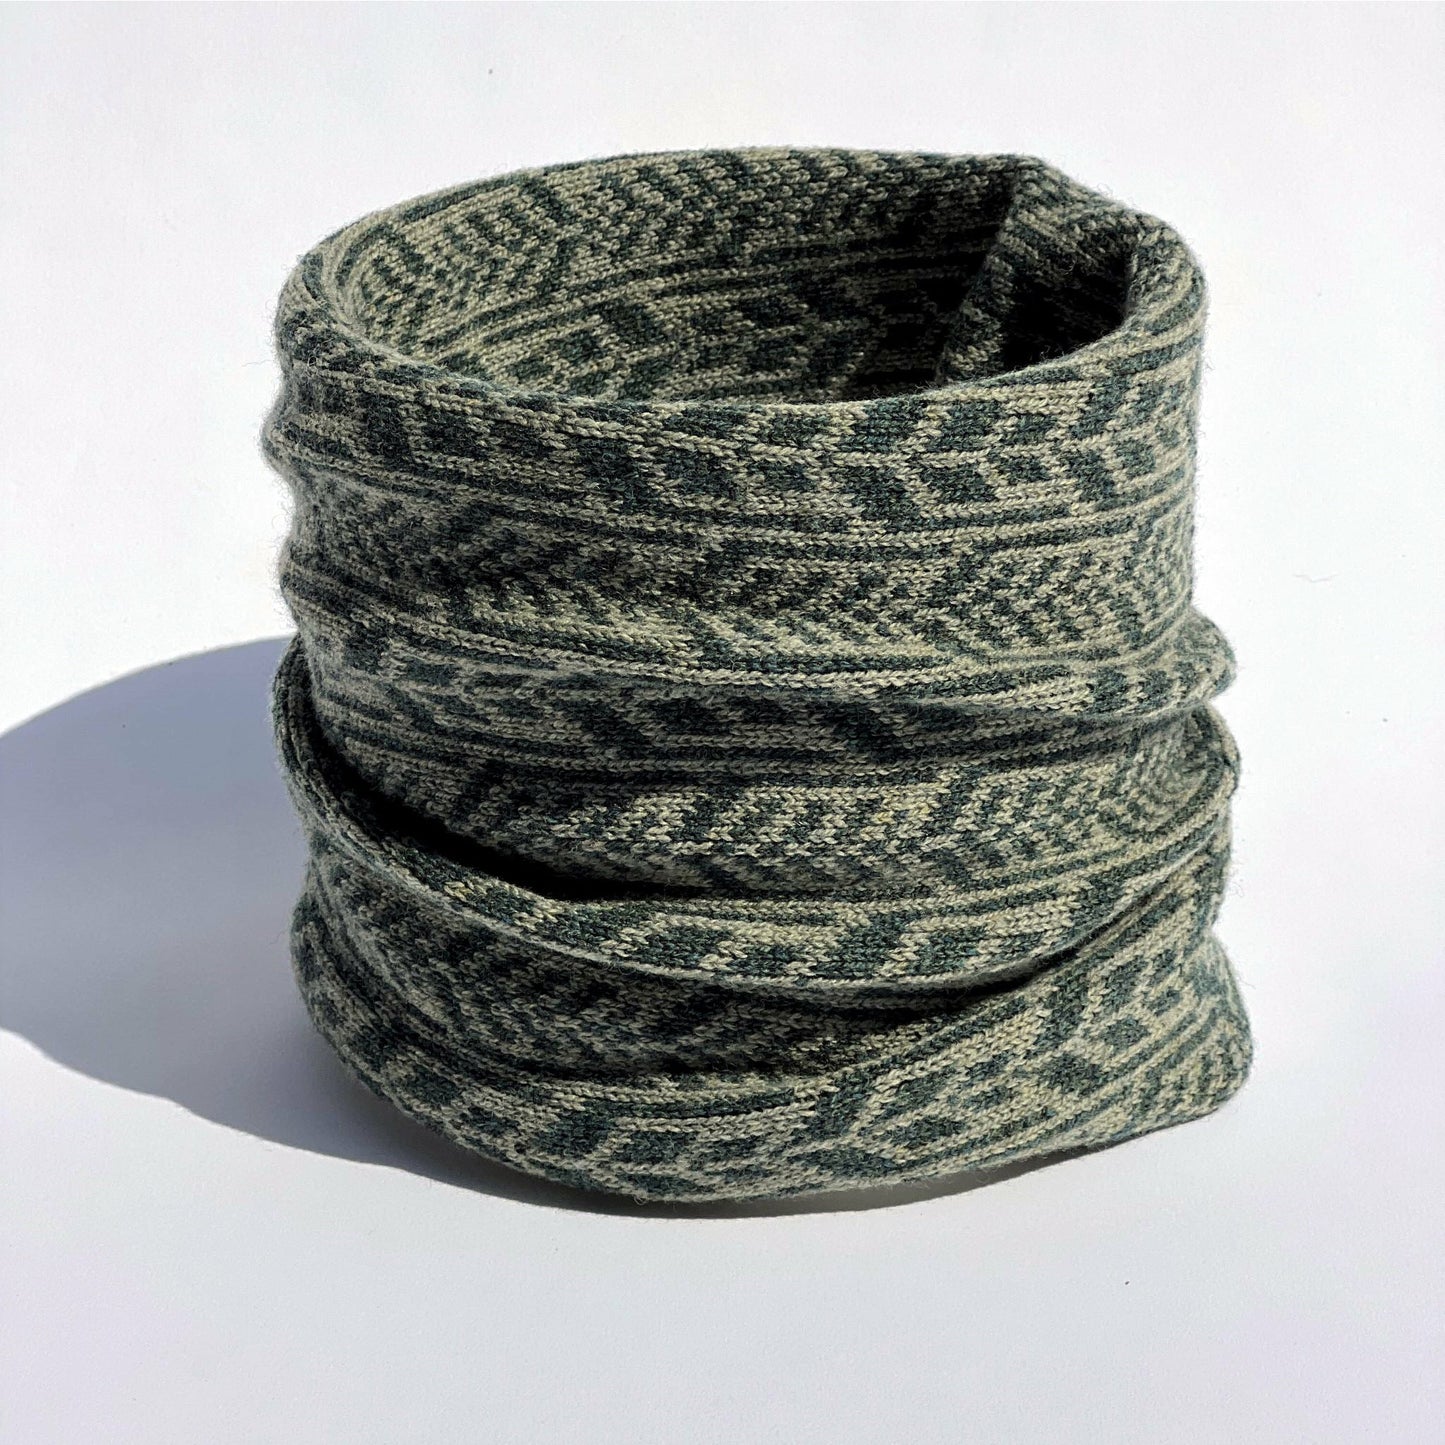 Our scarves and neck warmers are all knitted using a punch-card system on a manual vintage knitting machine and made from pure Merino lamb's wool, with bespoke two-colour fair isle patterns unique to Hebridean Journey. This colour is Moss.